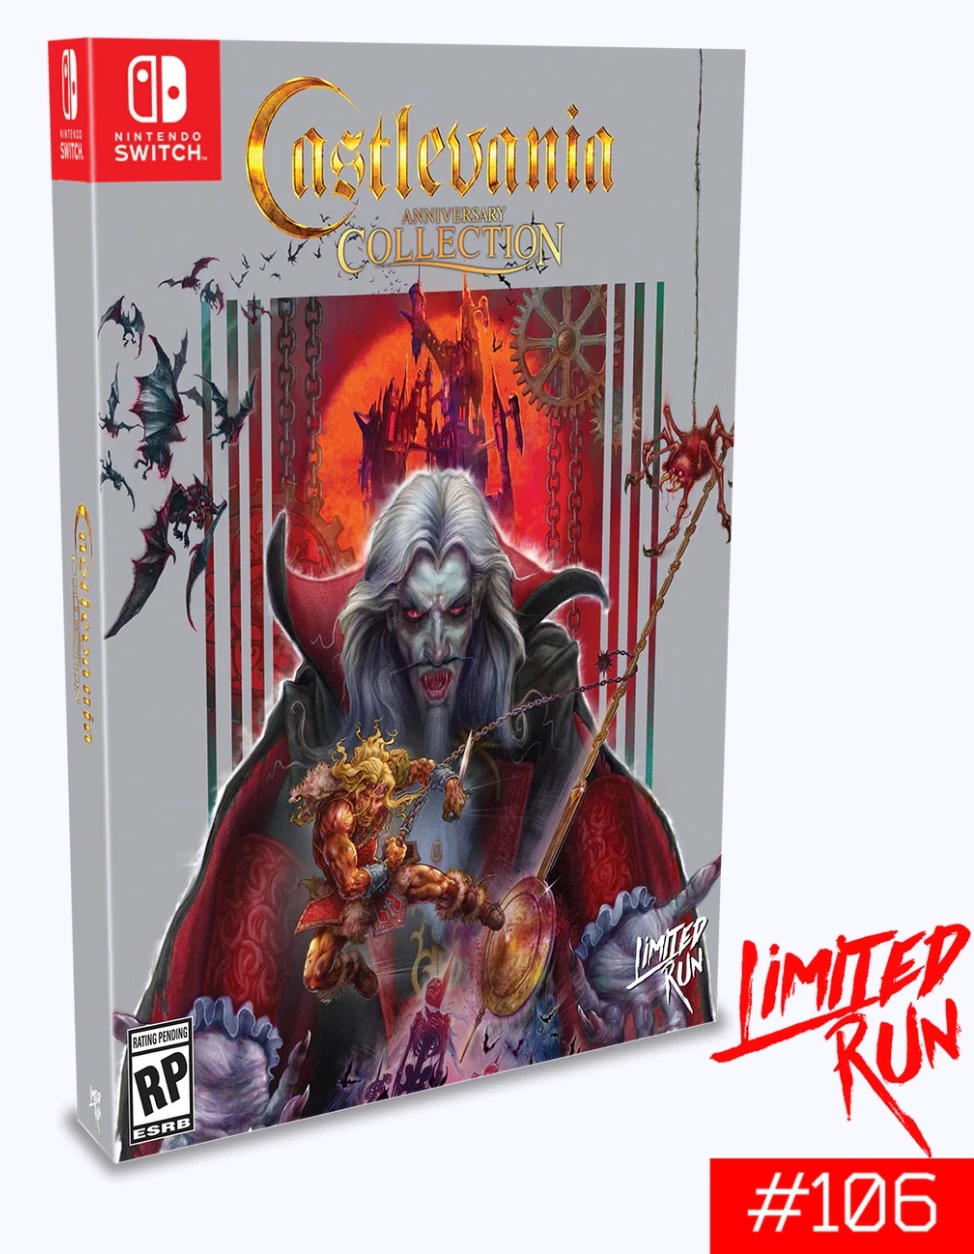 Castlevania - Anniversary Collection - Classic Edition (Limited Run) (Switch), Konami